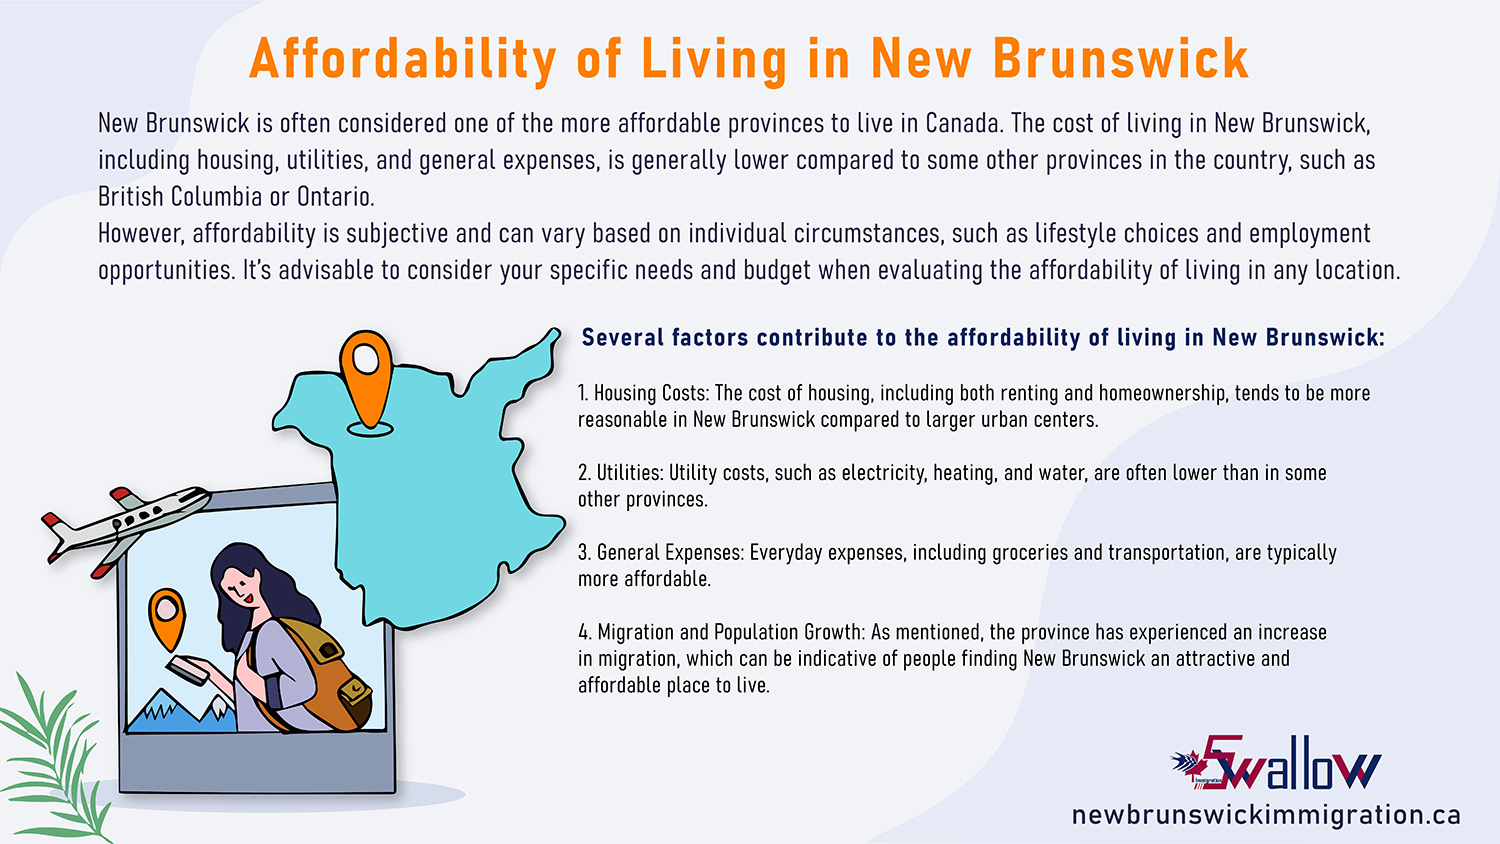 Affordability of Living in New Brunswick, Canada